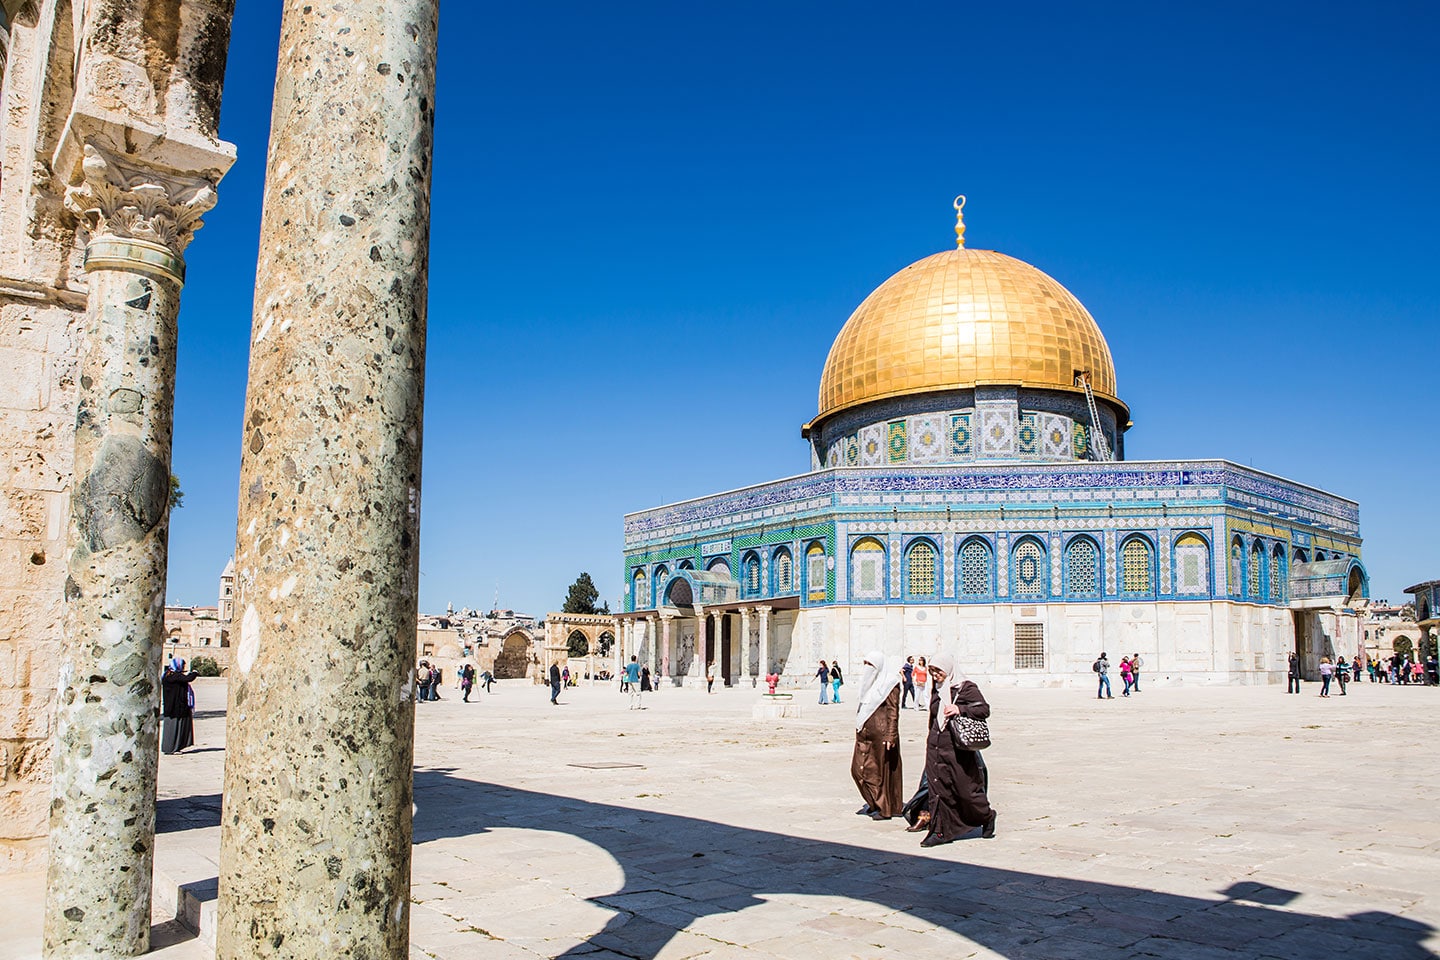 Square of the Dome of the Rock in Jerusalem, Israel